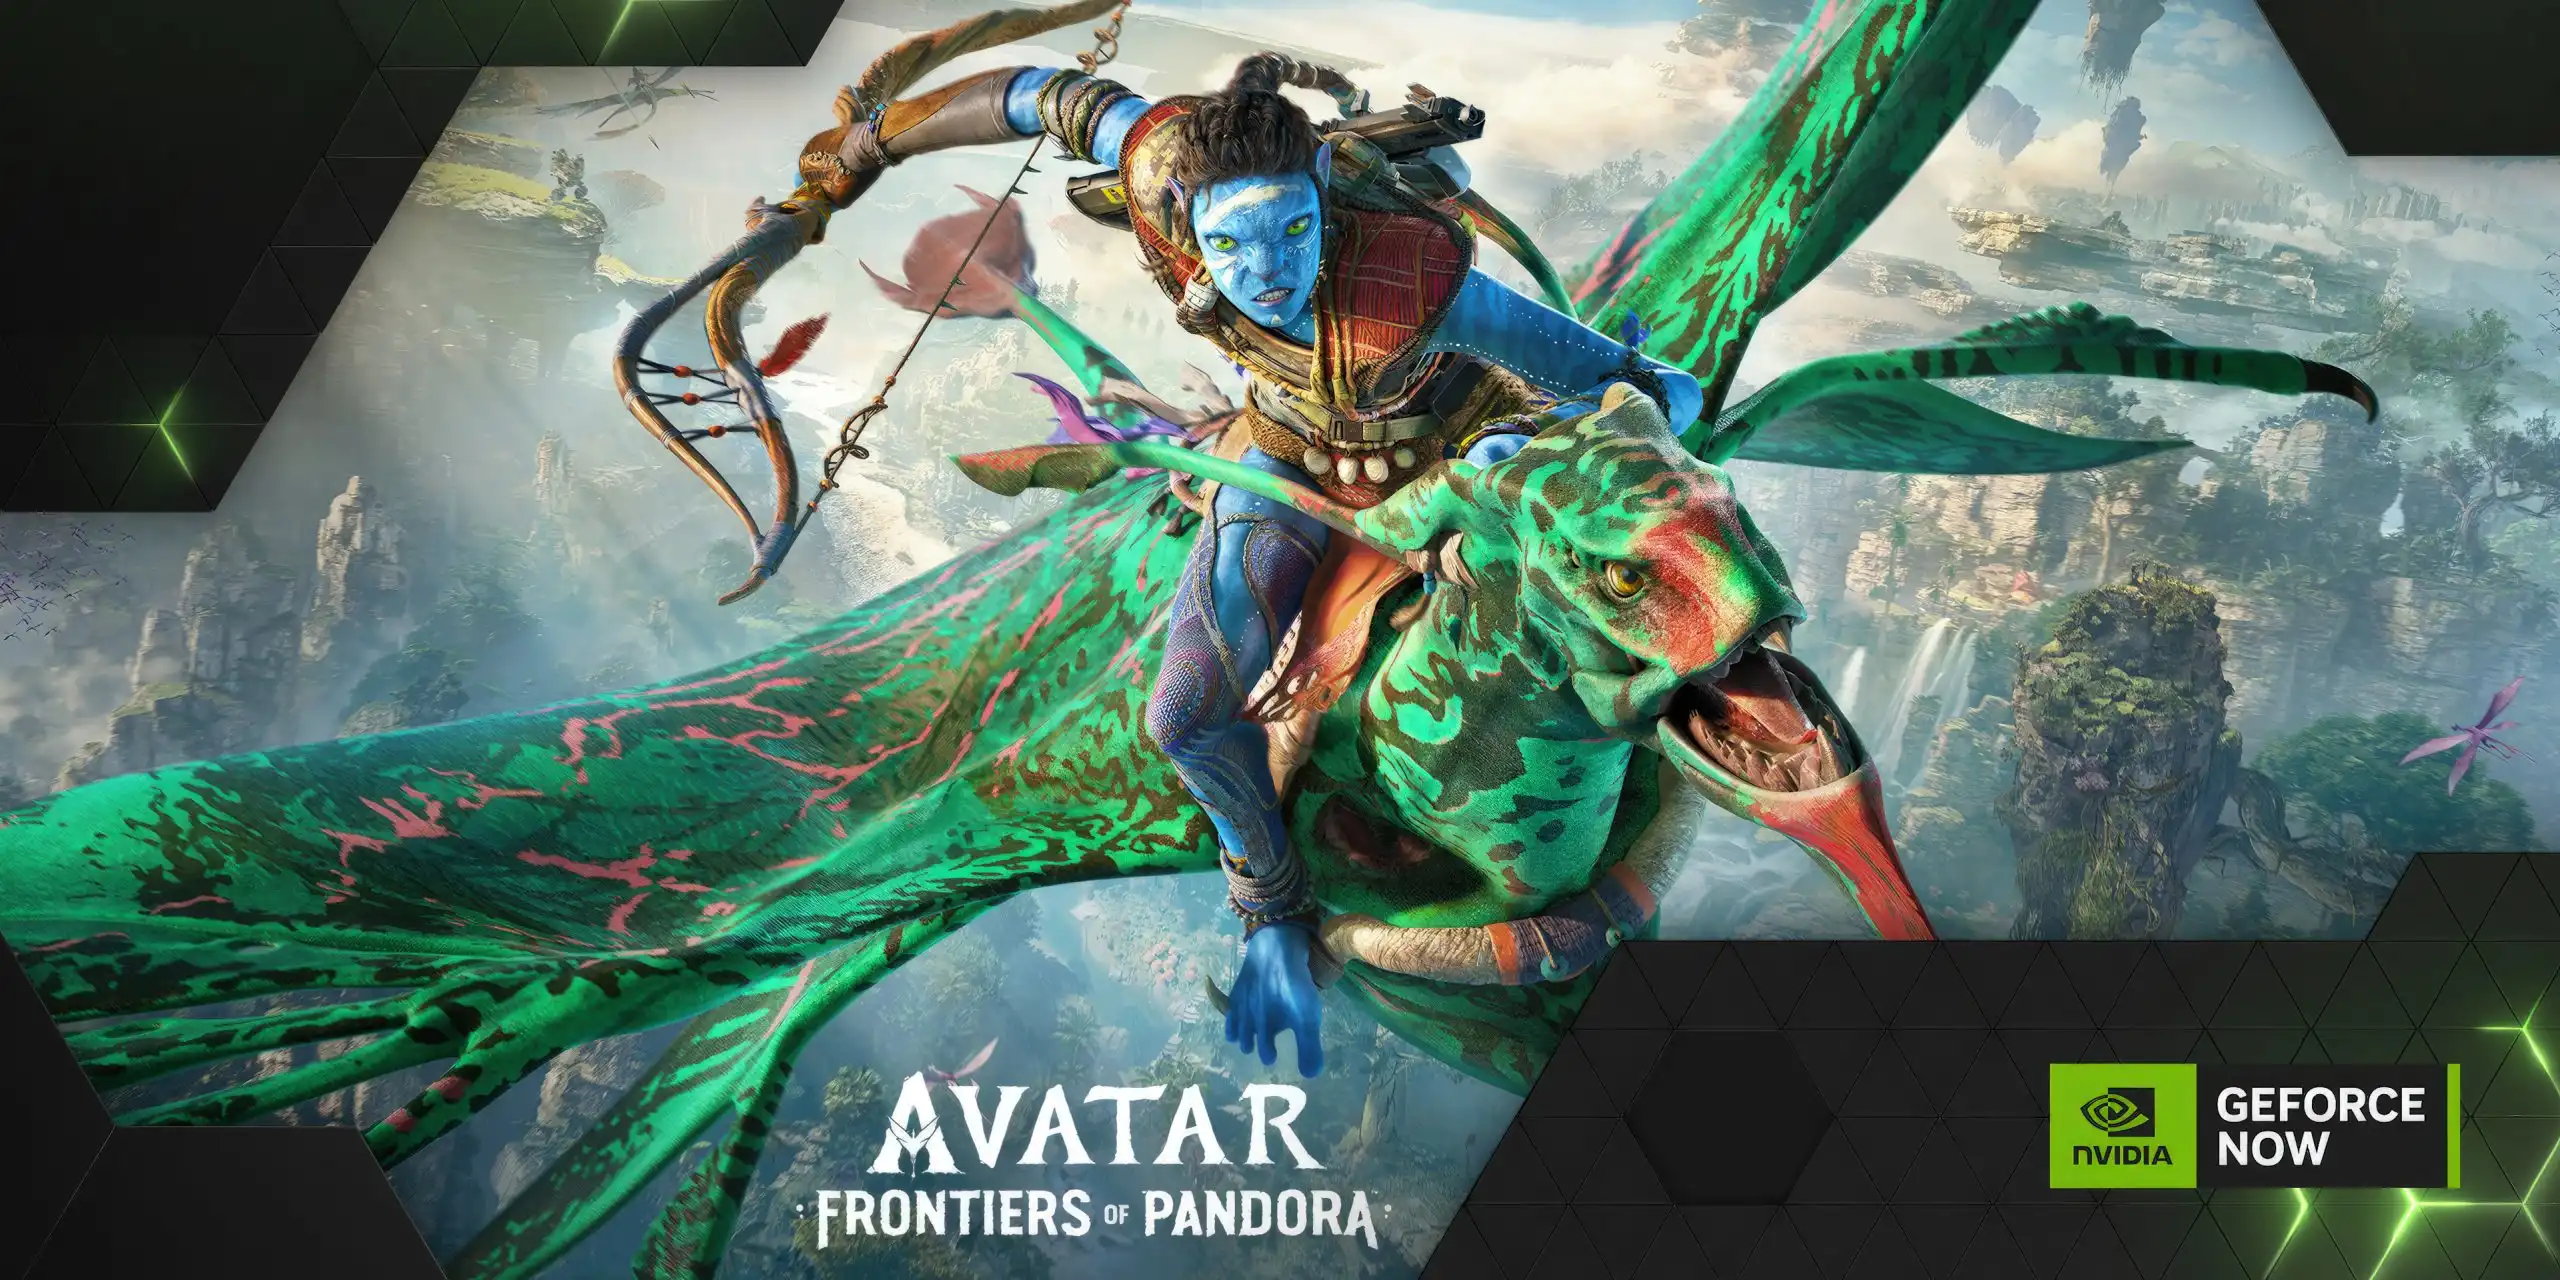 GeForce NOW Thursday Adds Avatar Frontiers of Pandora, The Day Before, and Warhammer 40K Rogue Trader